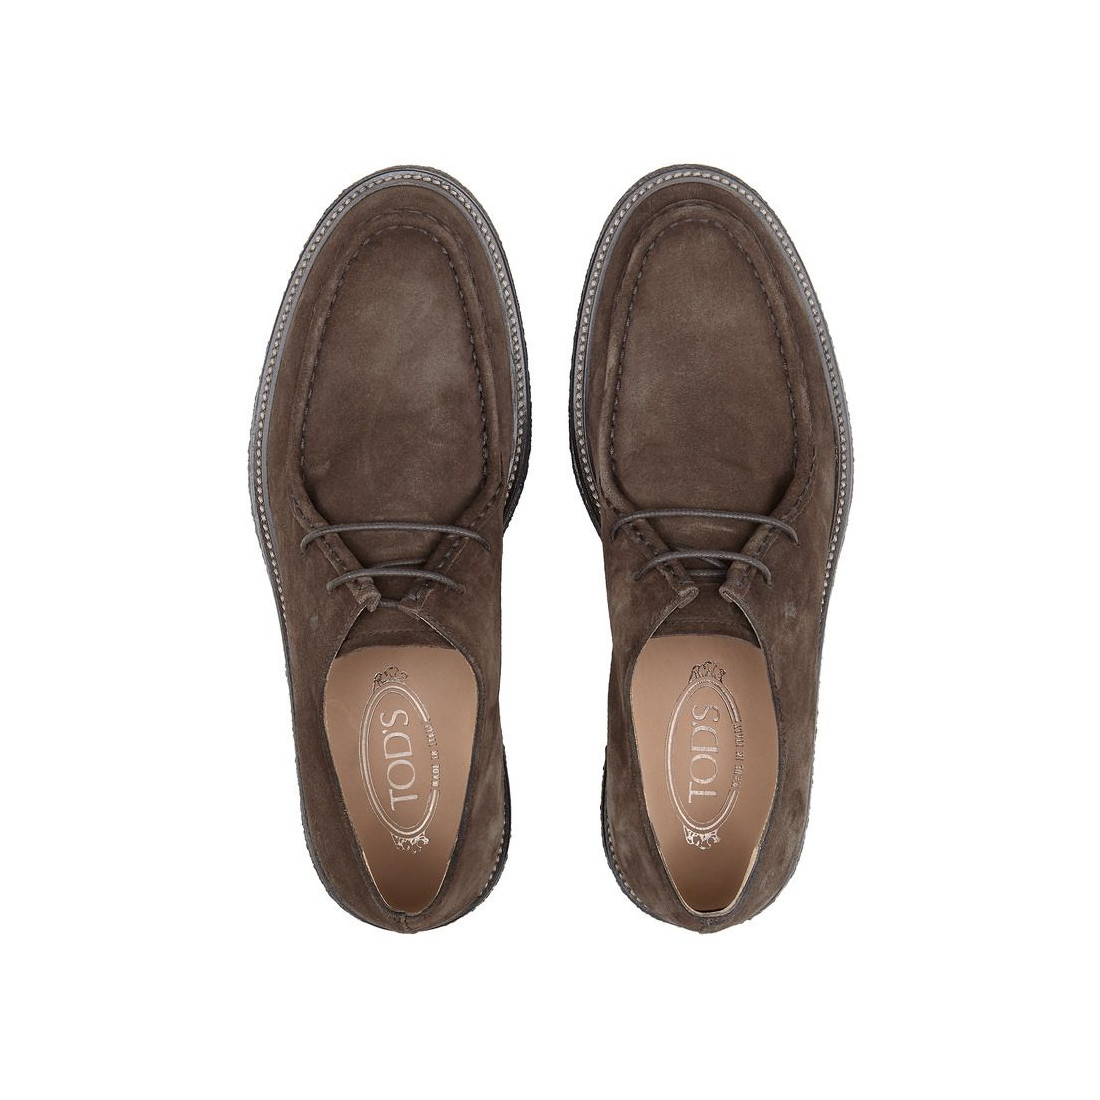 lace-ups in brown suede with rubber outsole